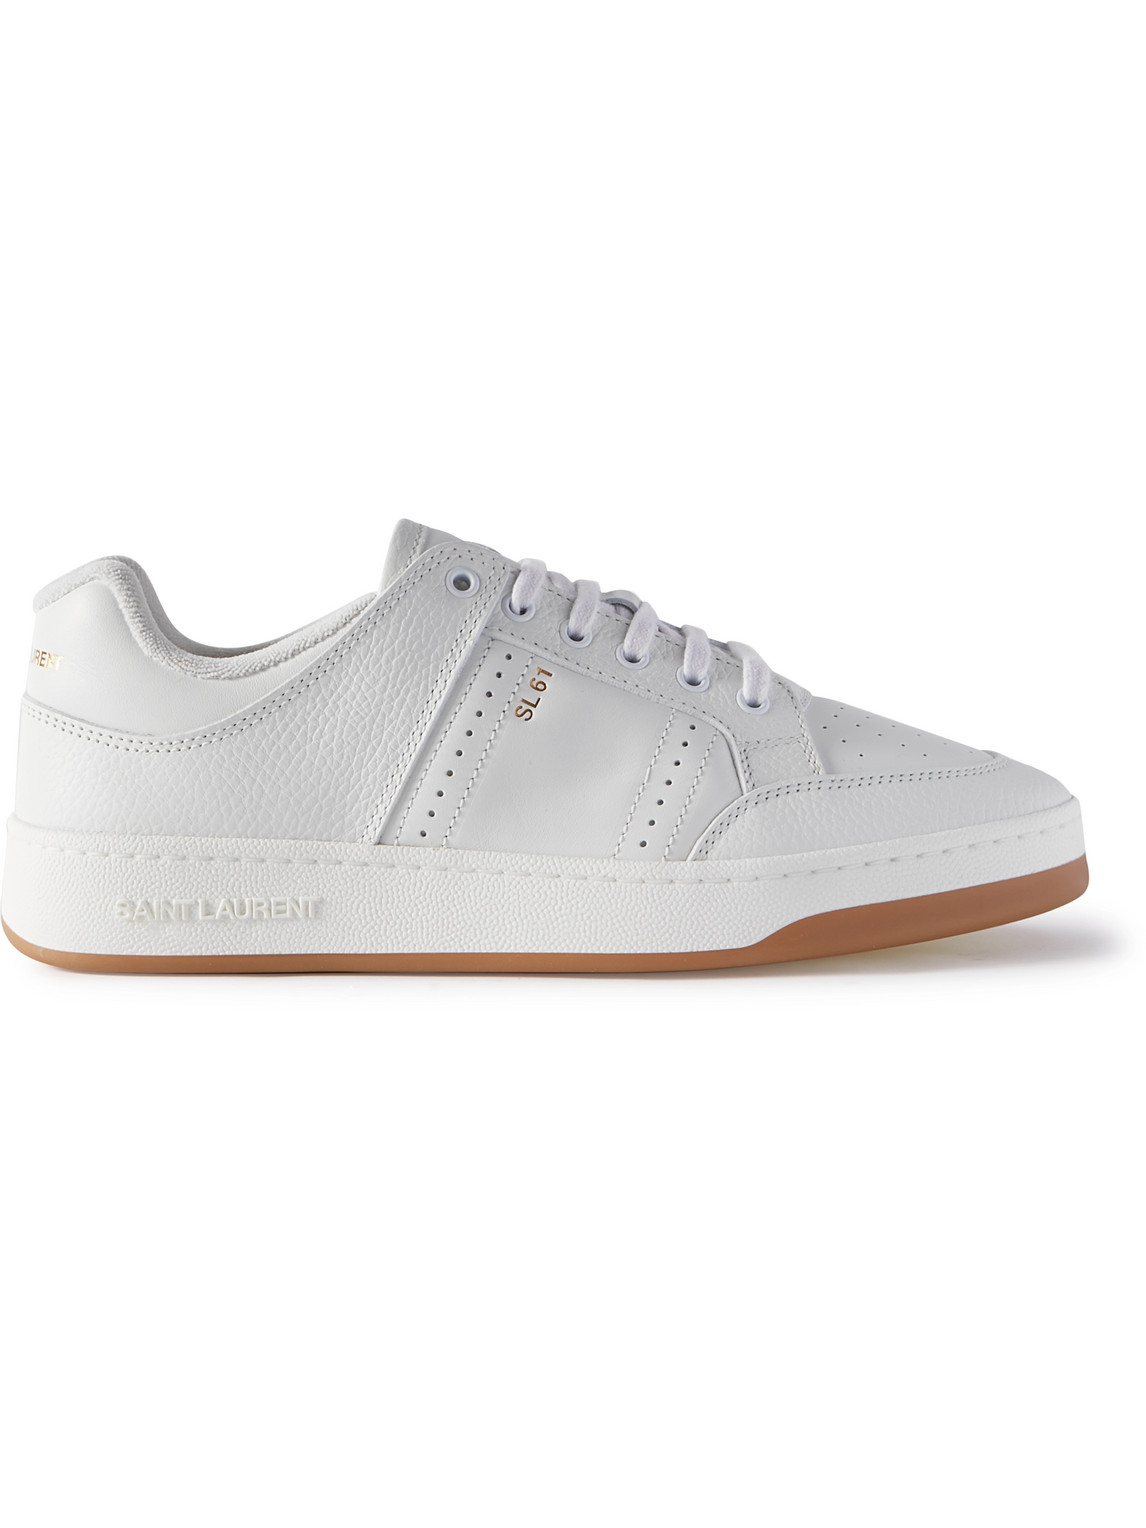 Saint Laurent Sl/61 Perforated Leather Sneakers In White